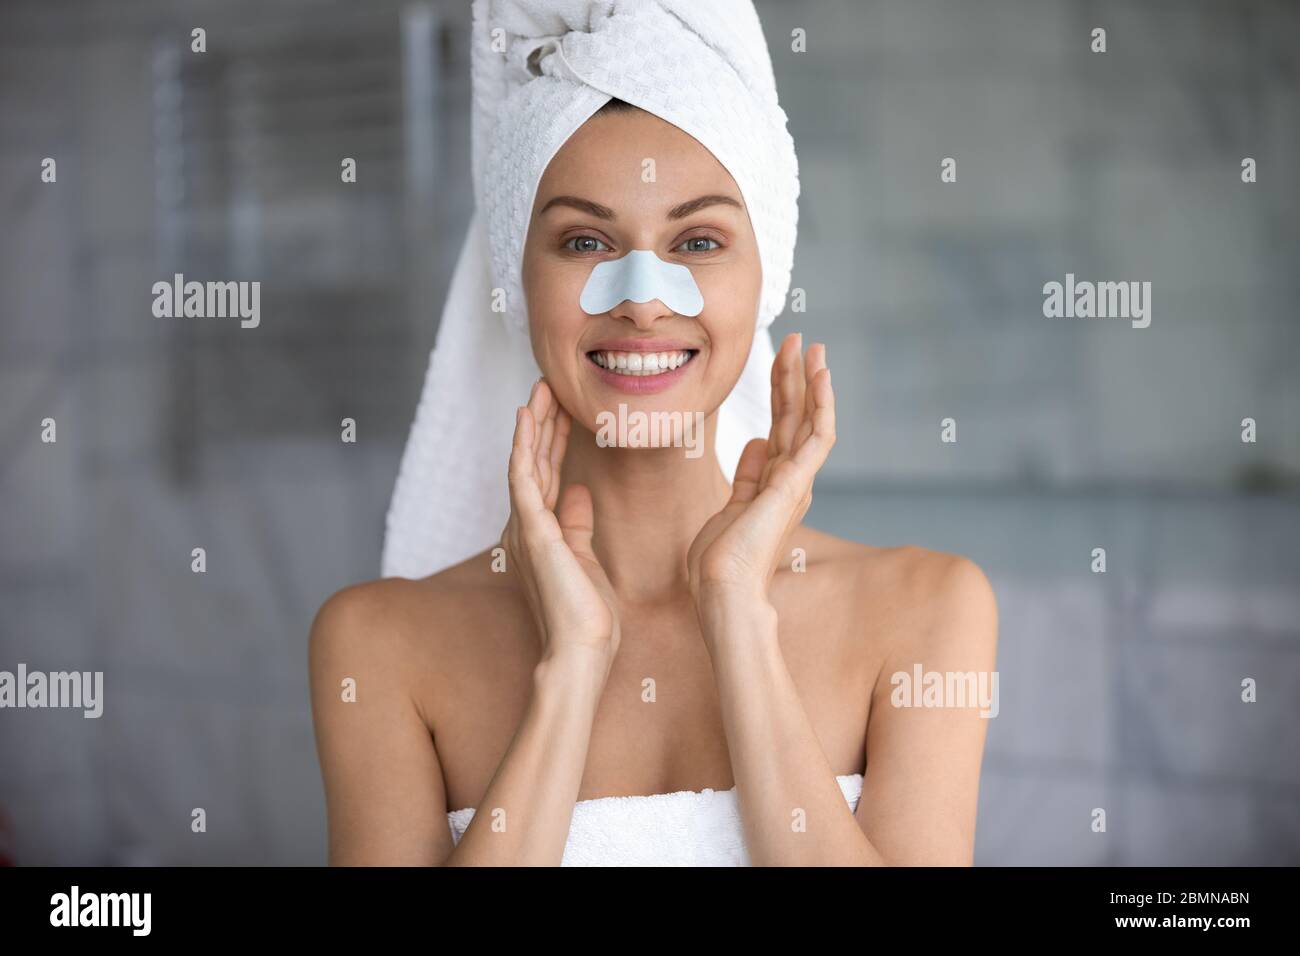 Woman apply cleansing pore nose strips smiles looks at camera Stock Photo